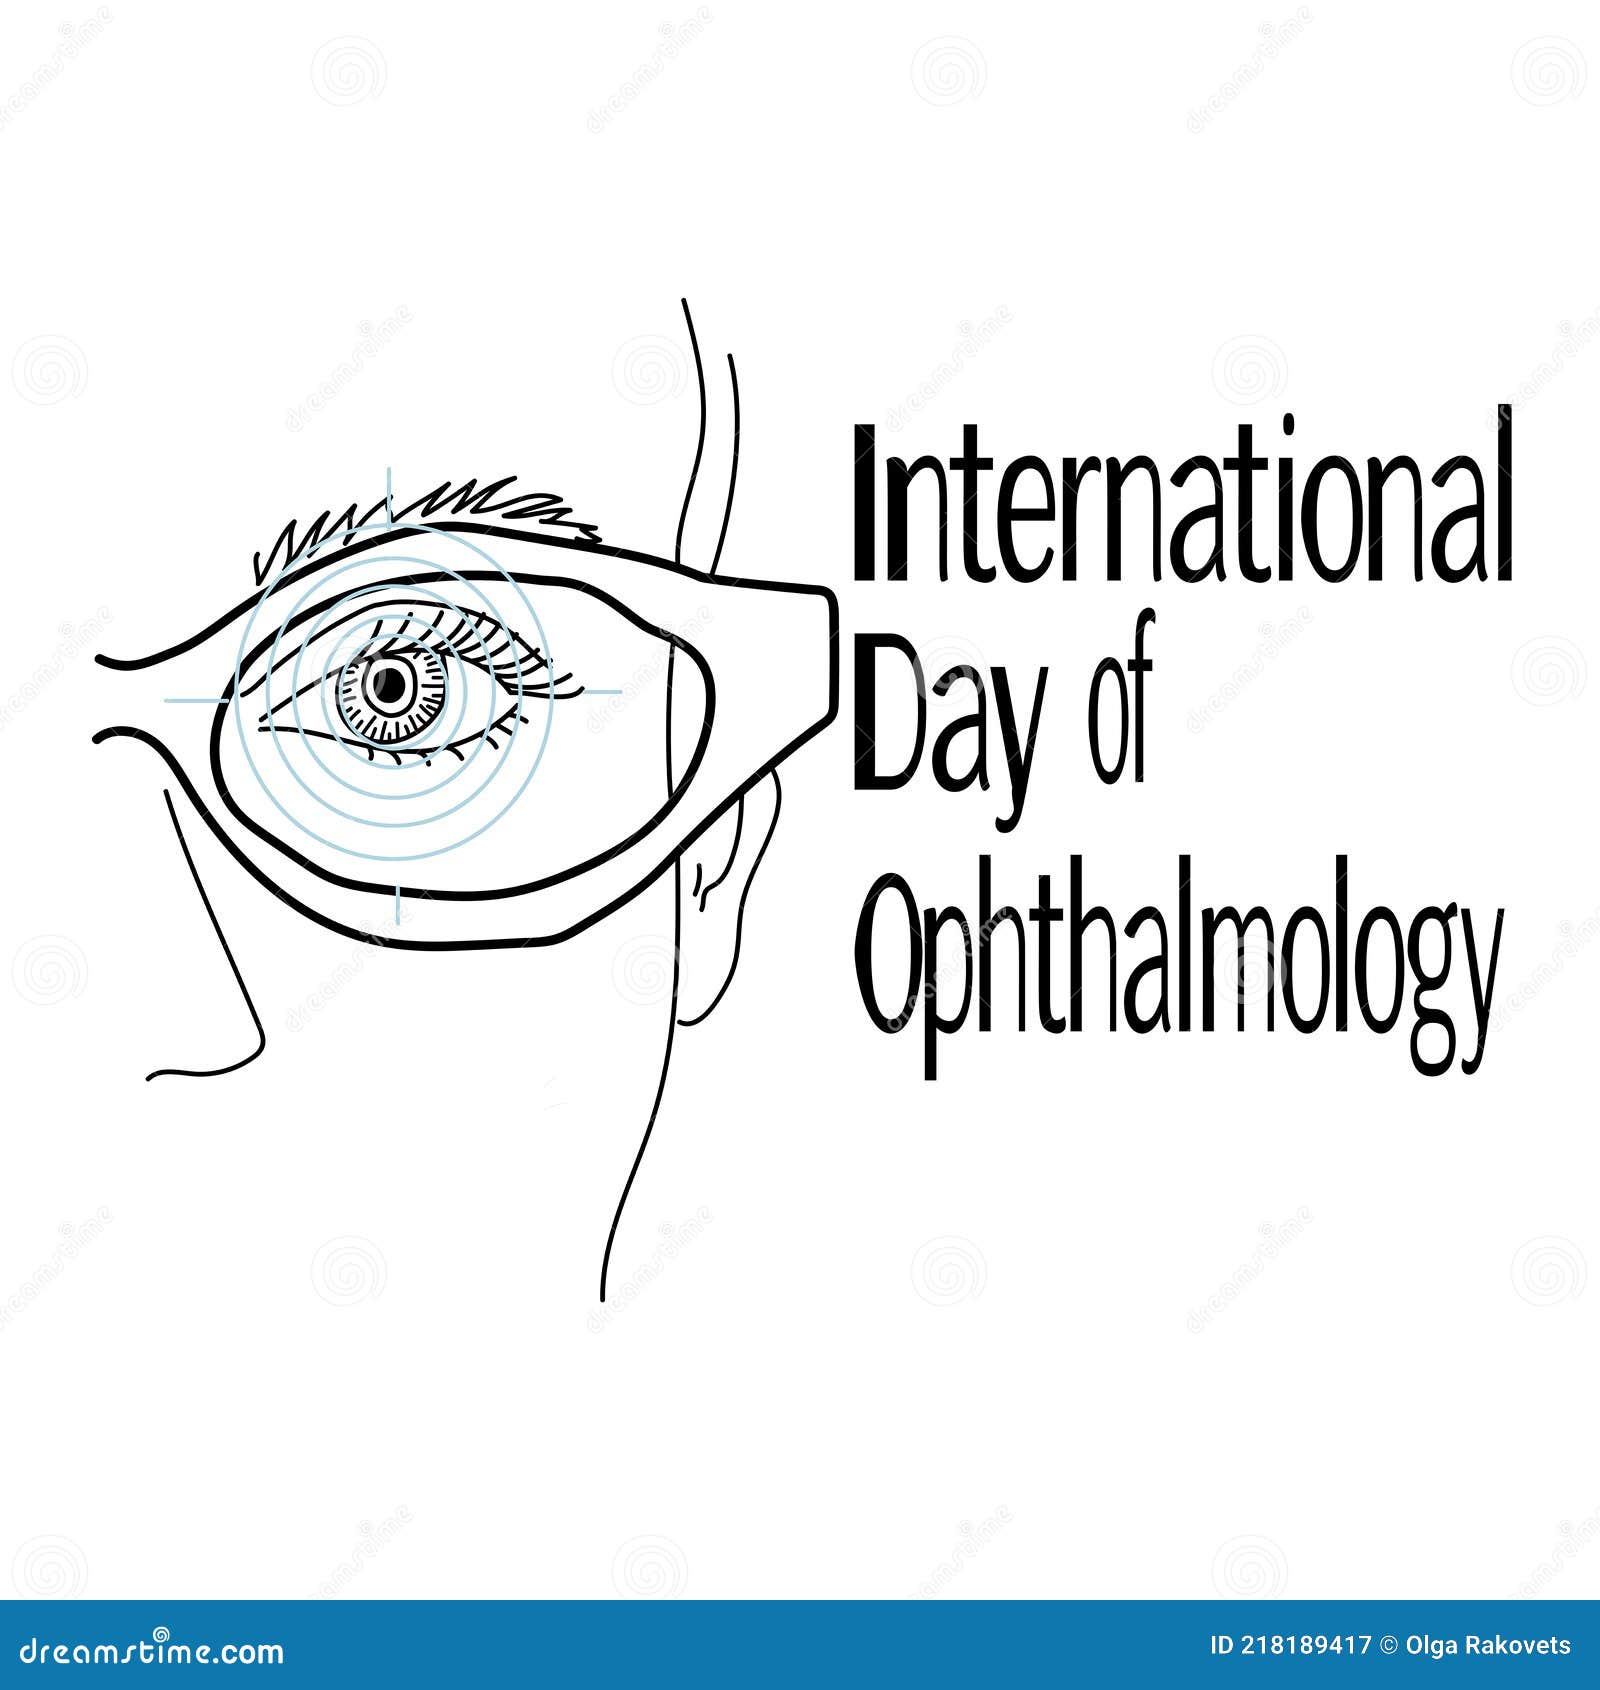 International Day of Ophthalmology , Schematic Representation of Vision